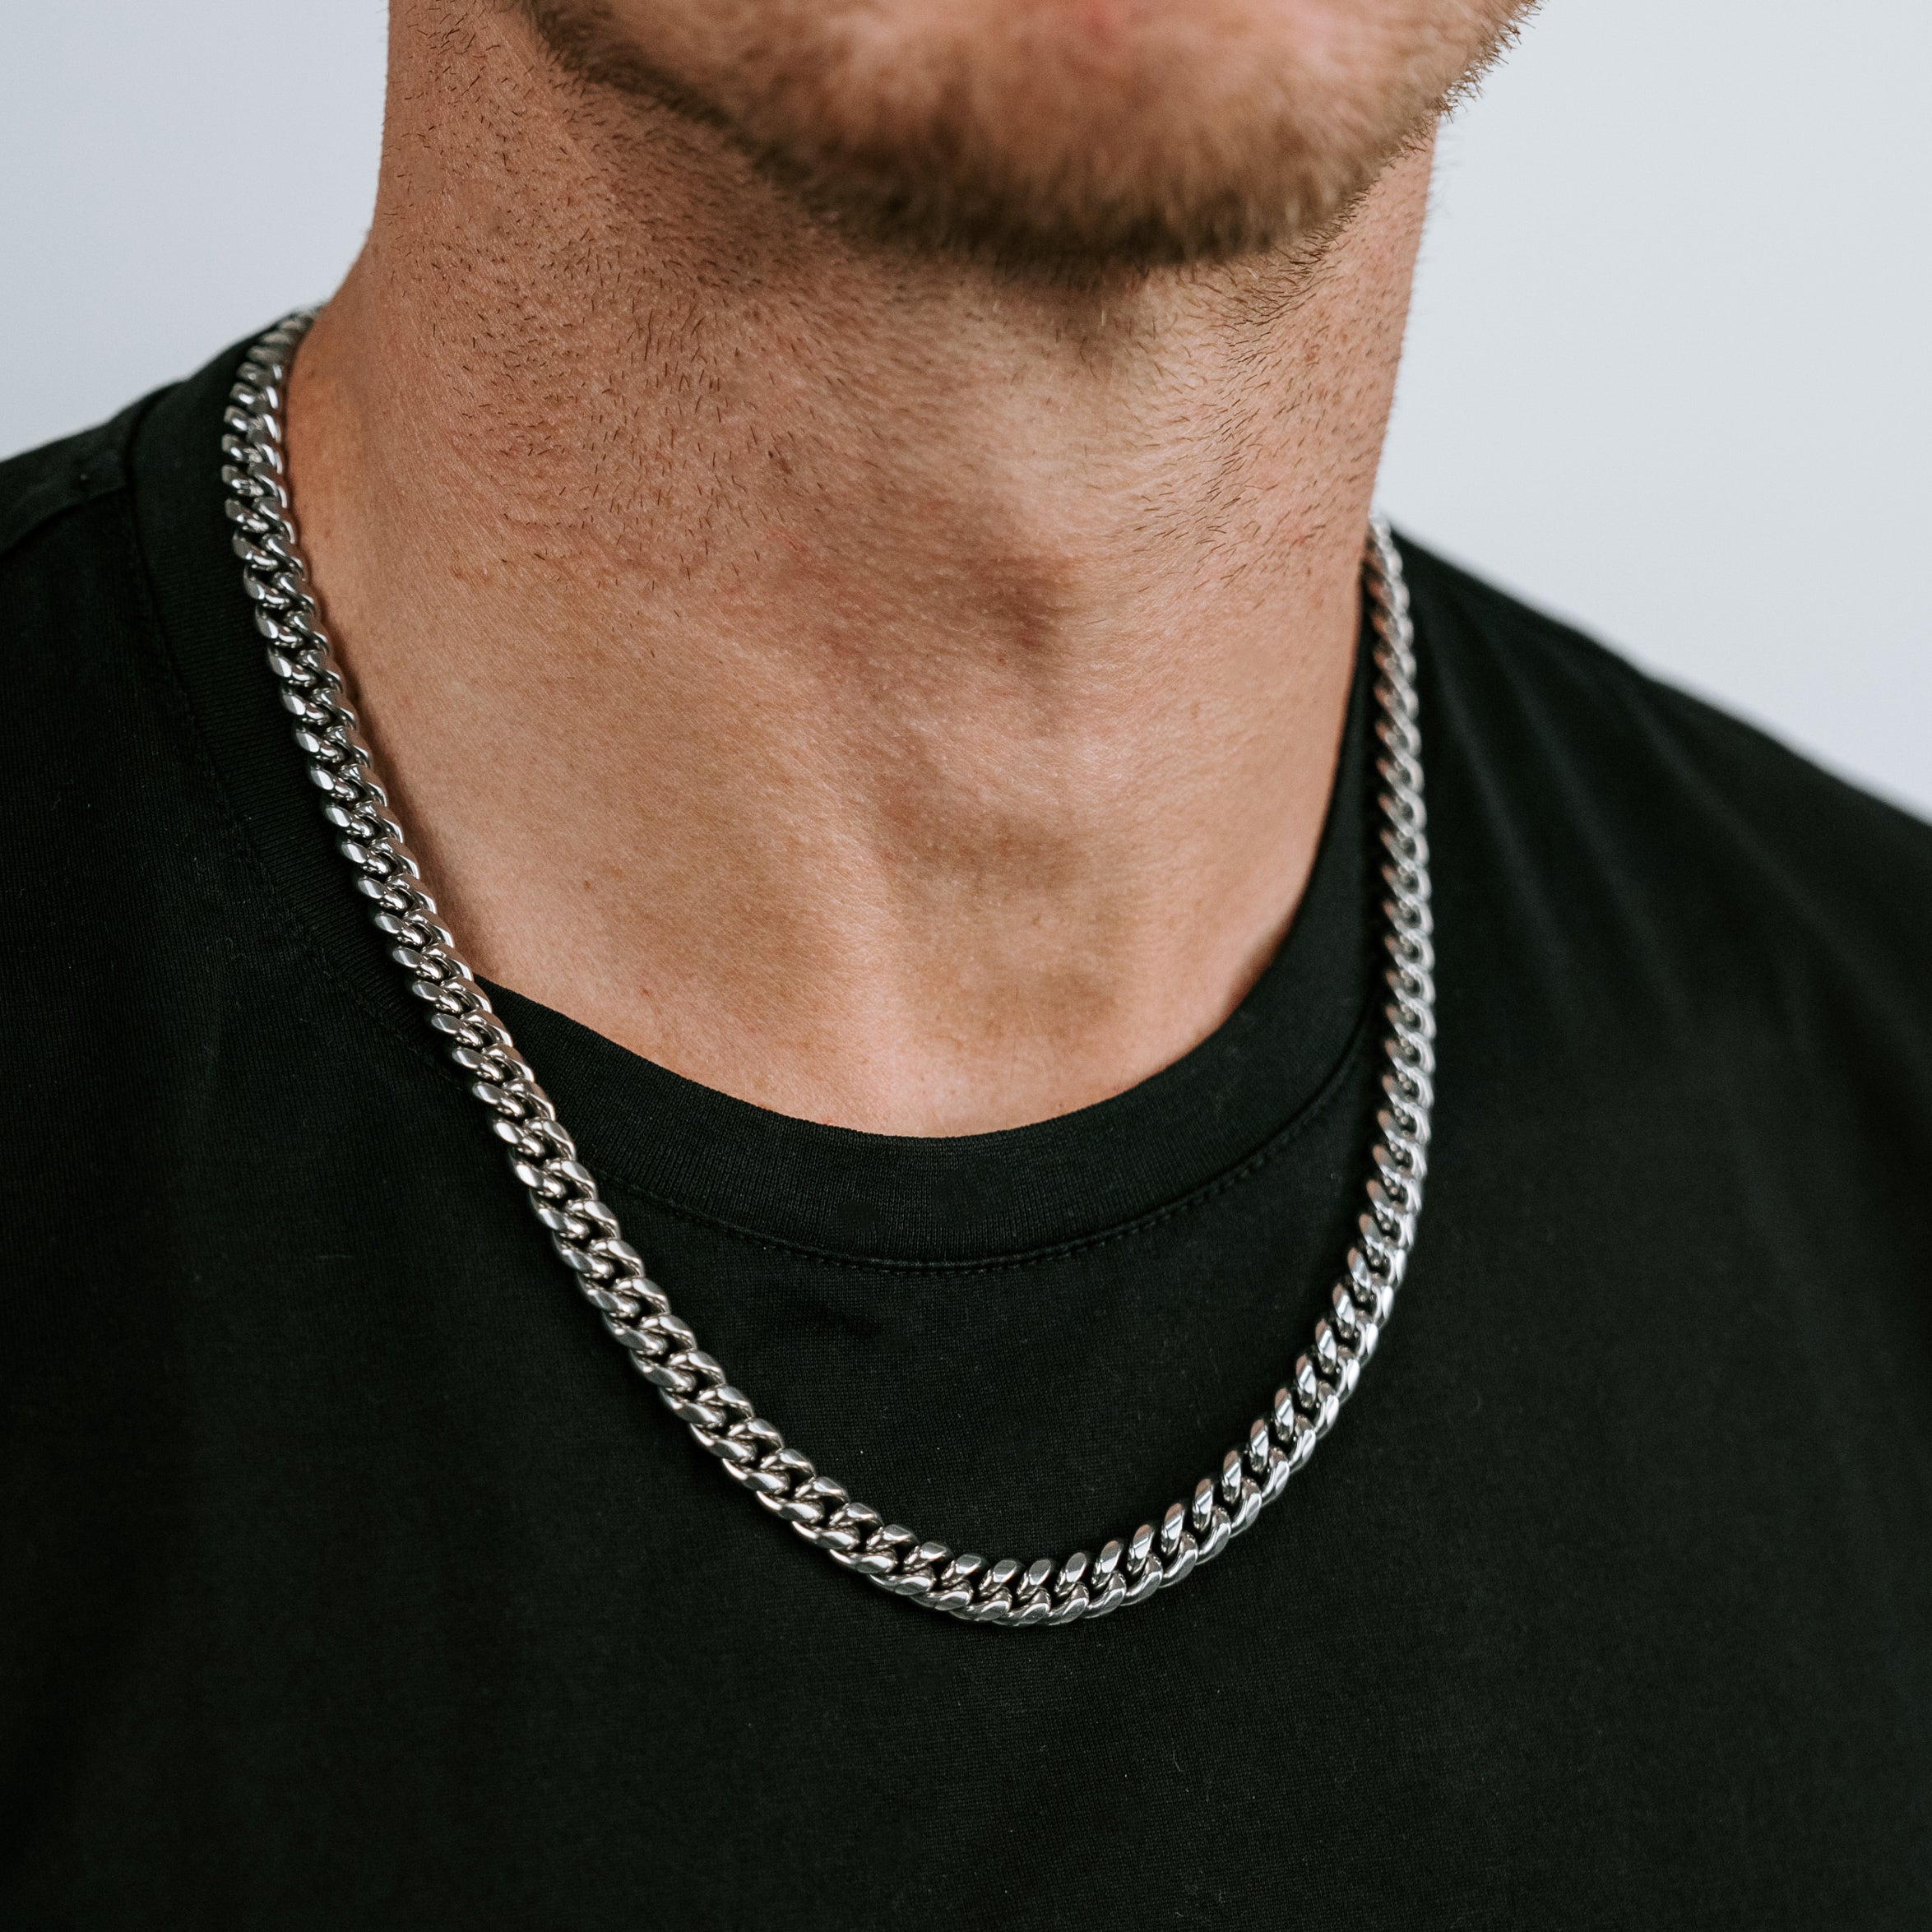 Cuban Chains: The Bold and Classic Men's Jewellery Statement